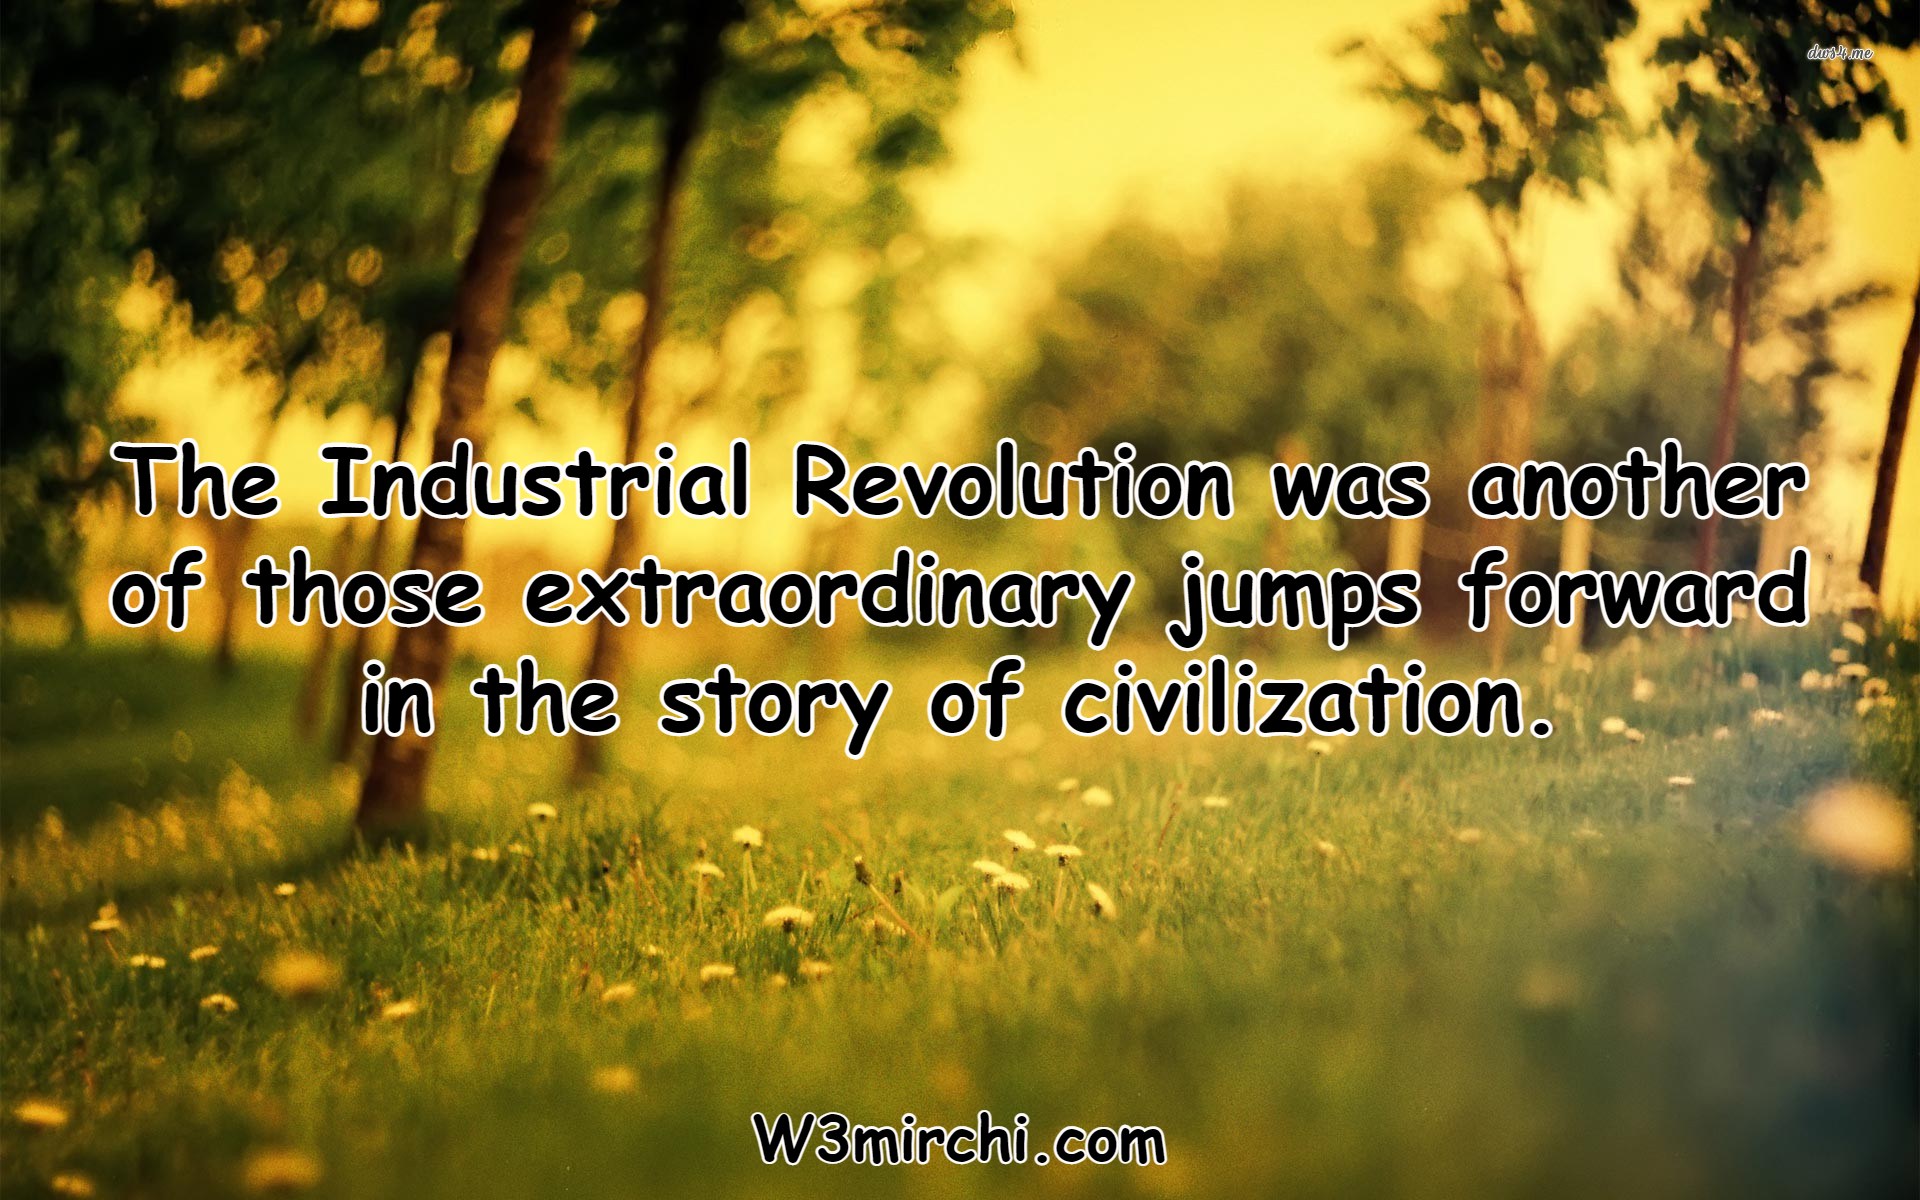 The Industrial Revolution was another of